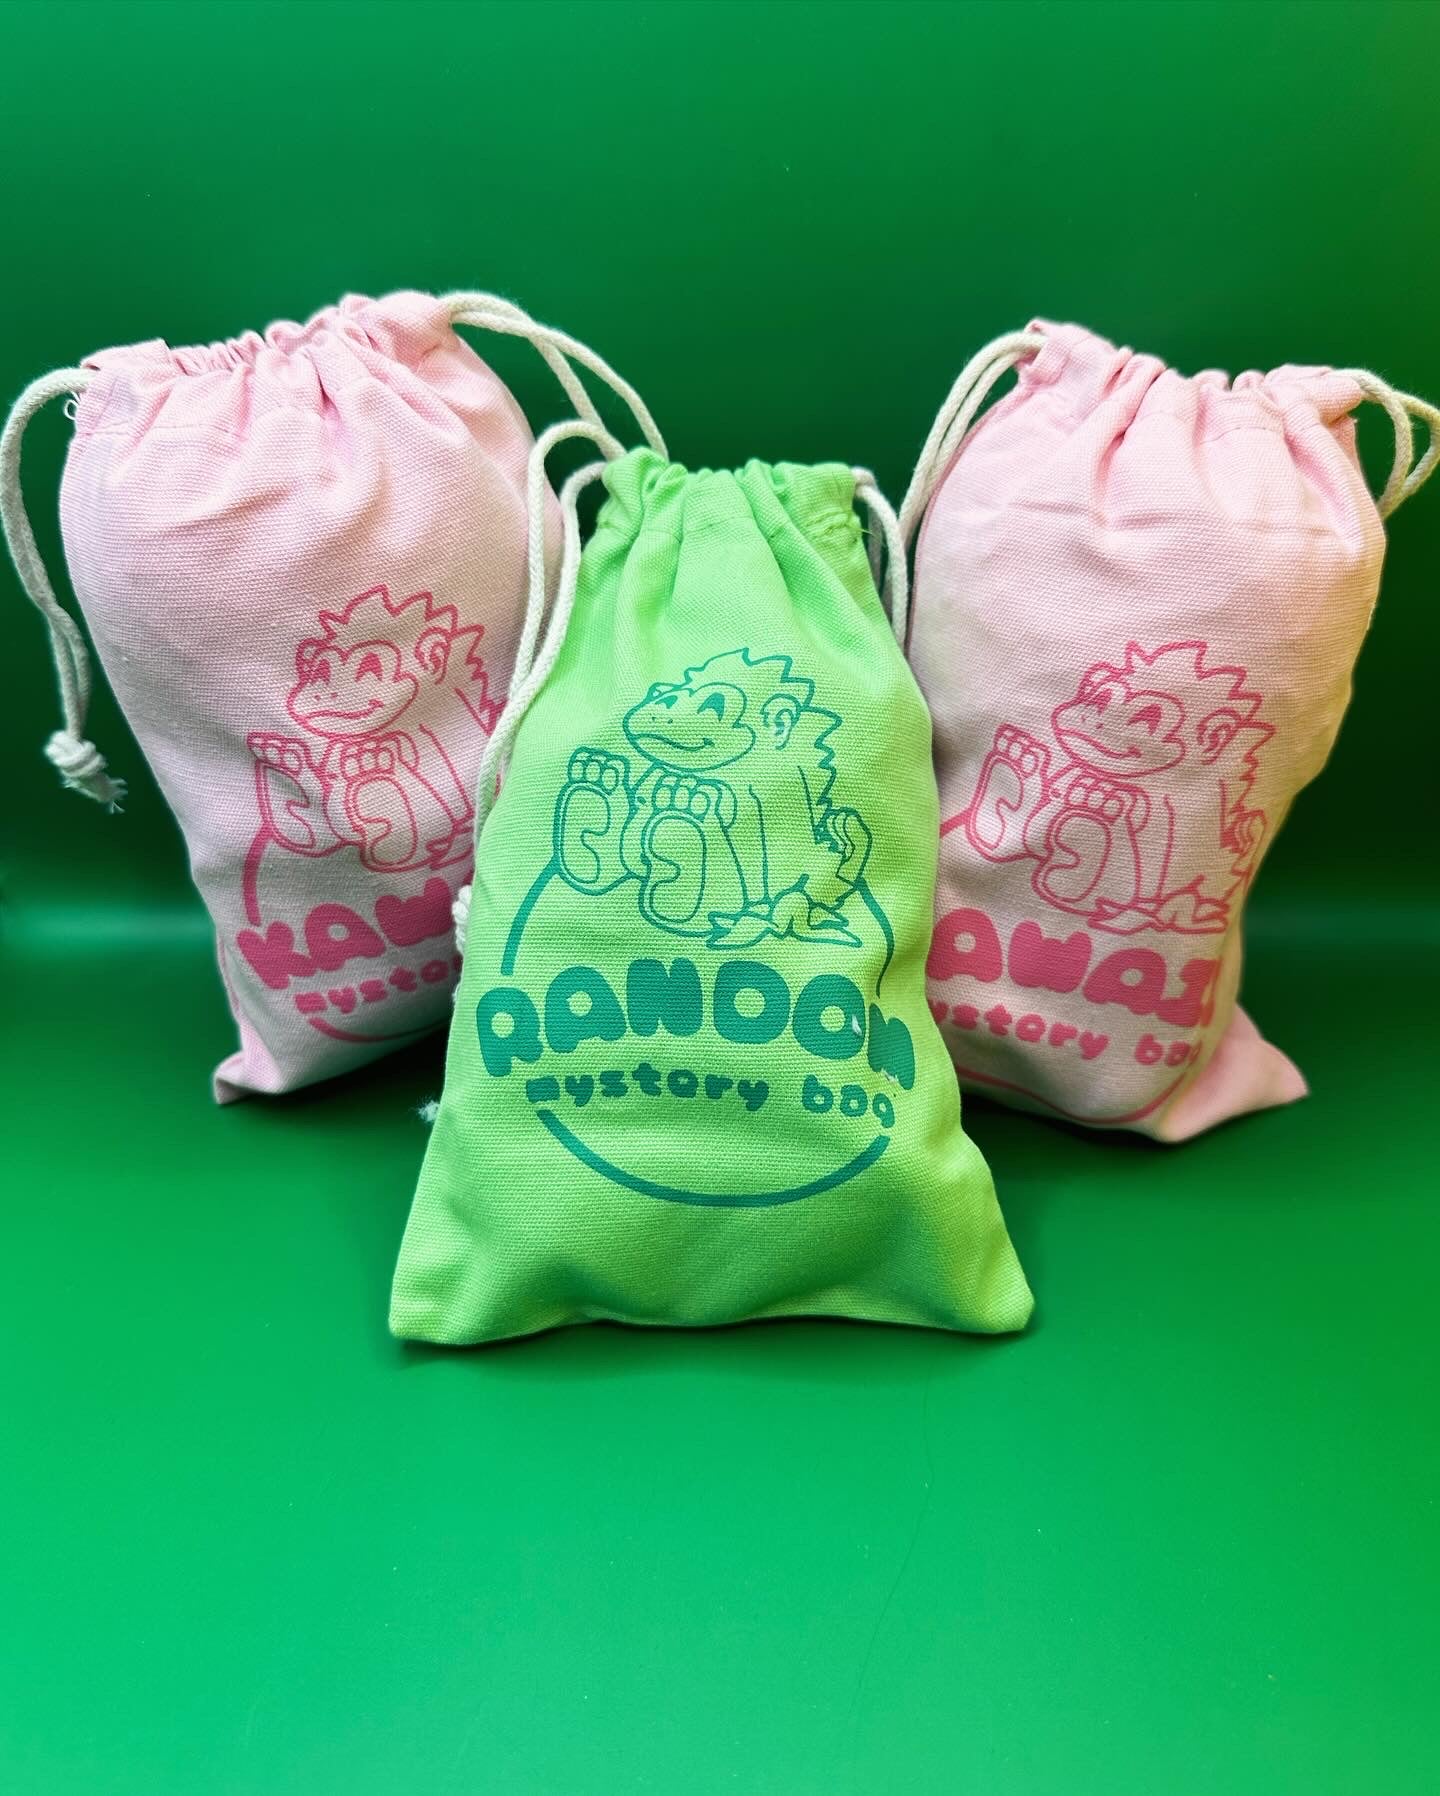 A photo of three mystery bags, one green and two pink. The pink bags are printed with a pink gorilla logo and say “kawaii mystery bag”. The green one is printed with a green pink gorilla logo and says “random mystery bag”